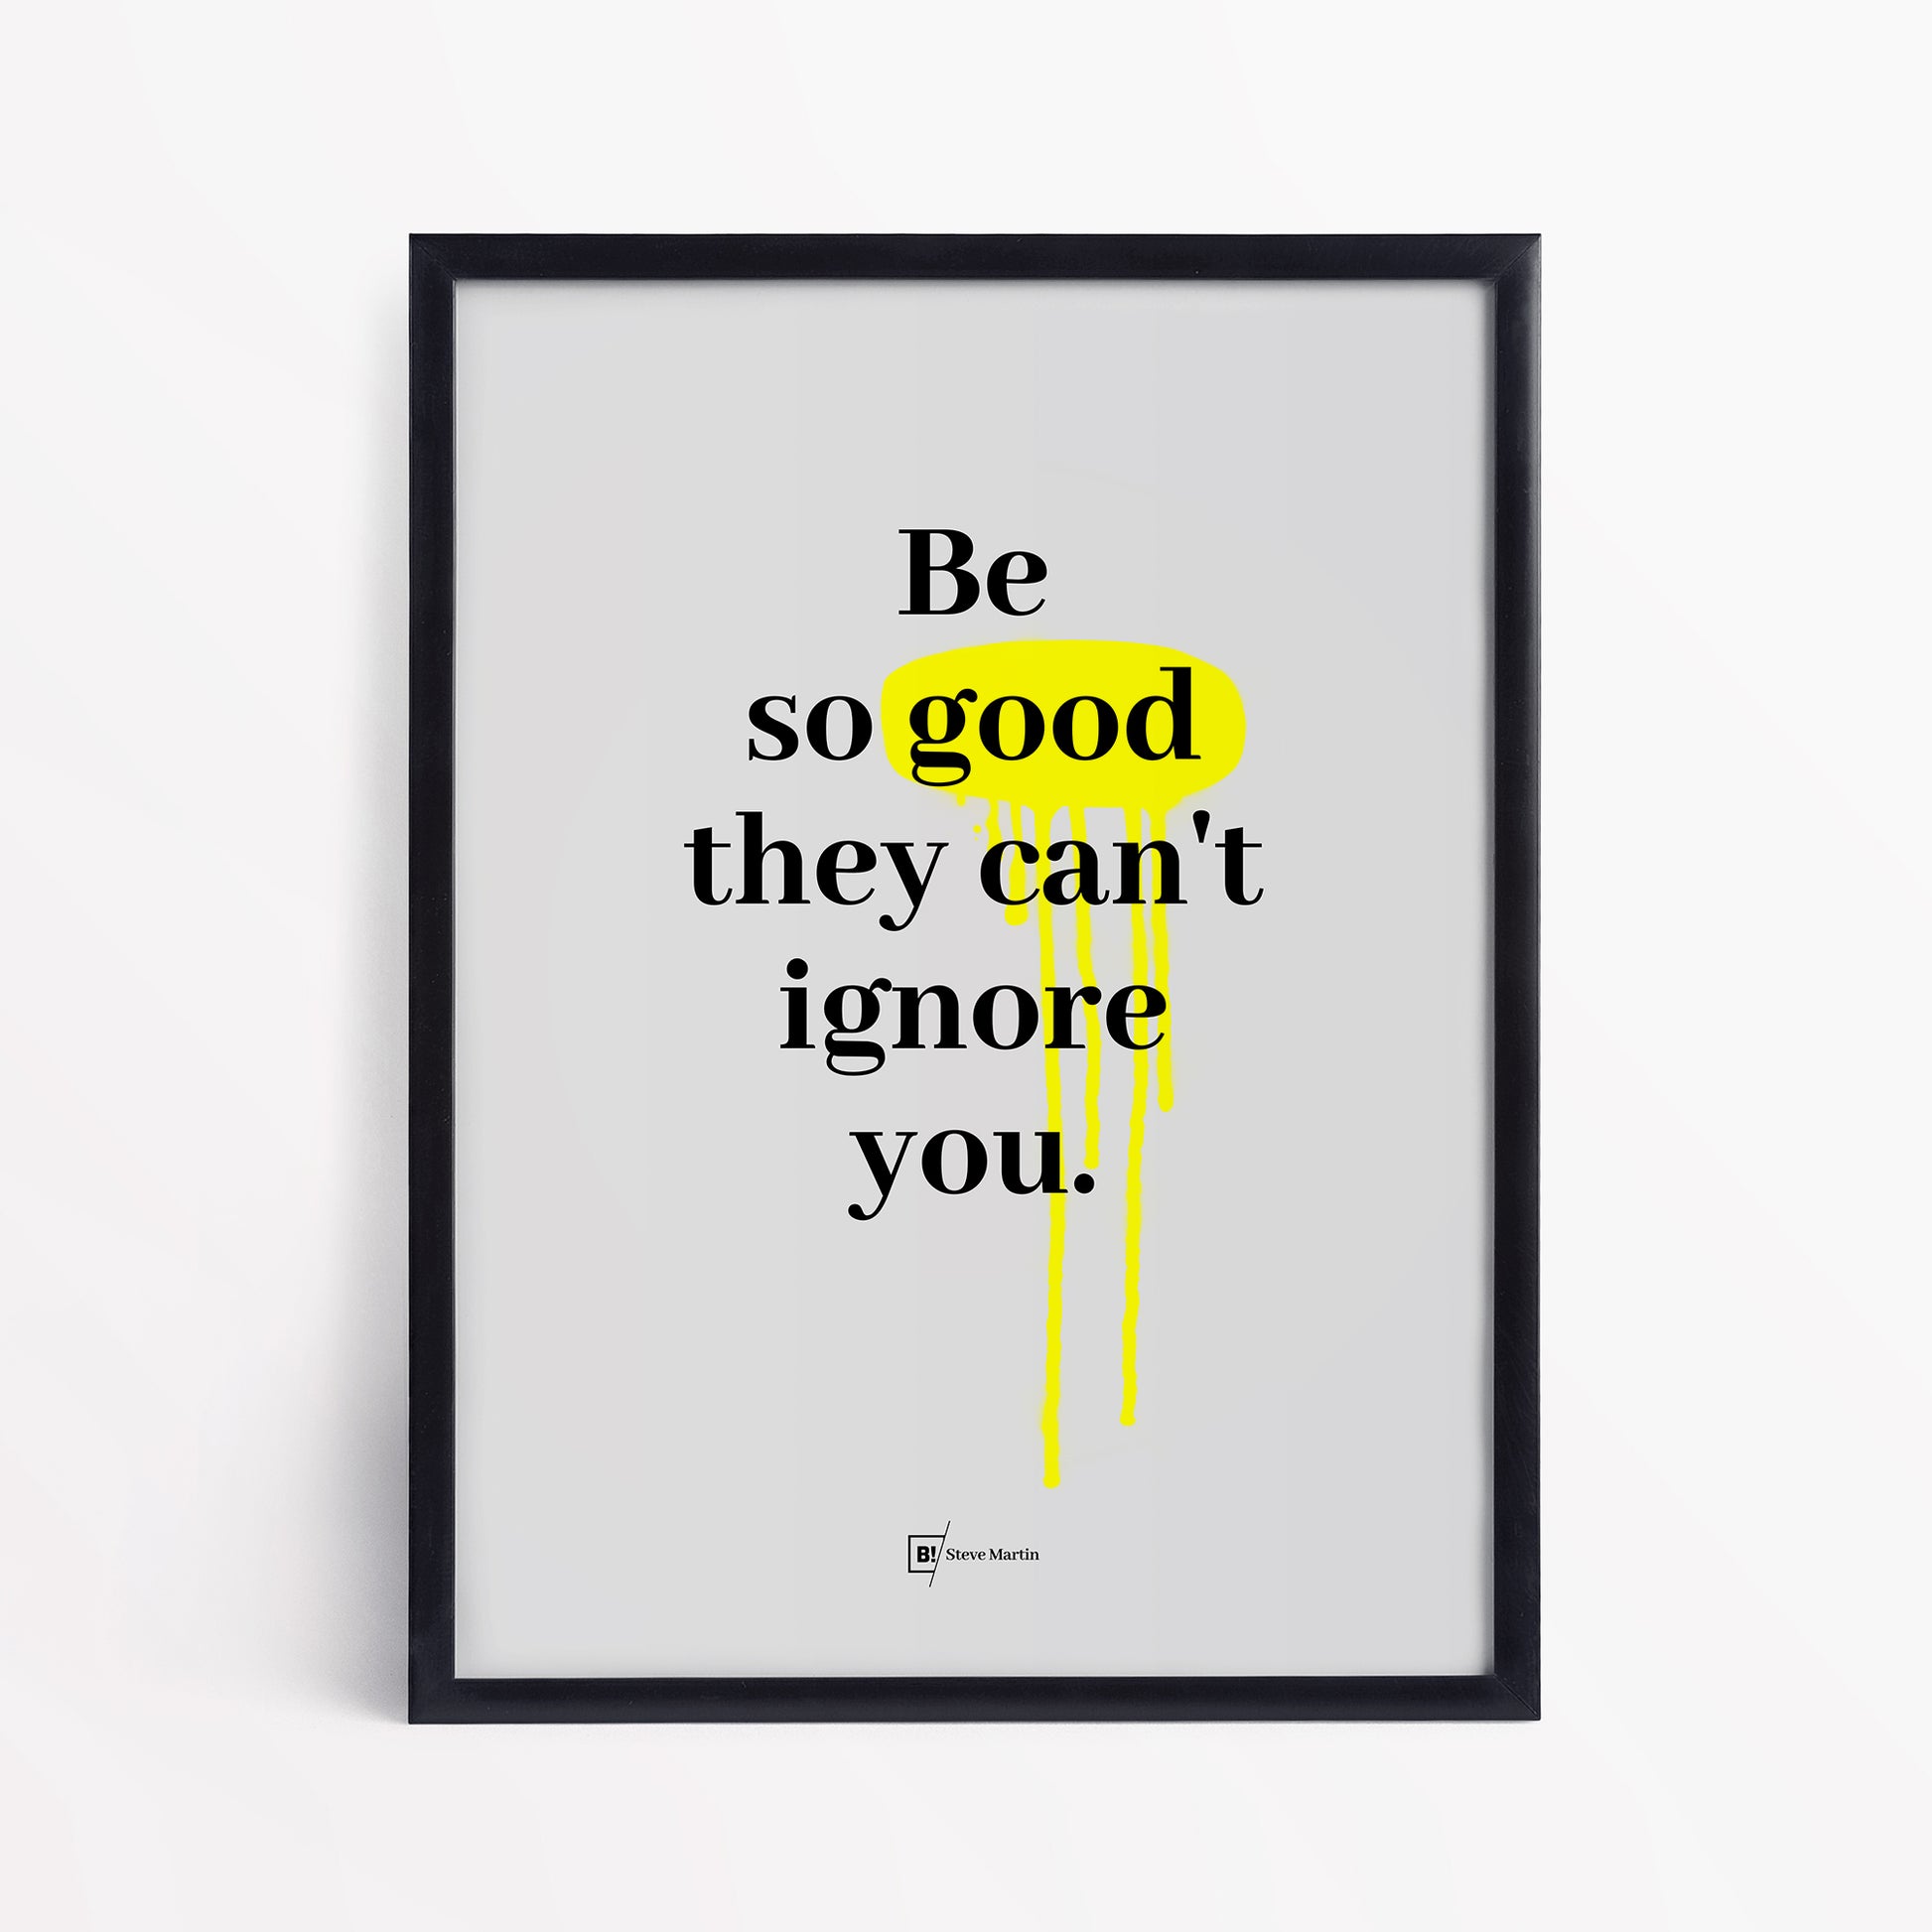 Be inspired by Steve Martin's famous "Be so good they can't ignore you" quote art print. This artwork was printed using the giclée process on archival acid-free paper and is presented in a simple black frame that captures its timeless beauty in every detail.